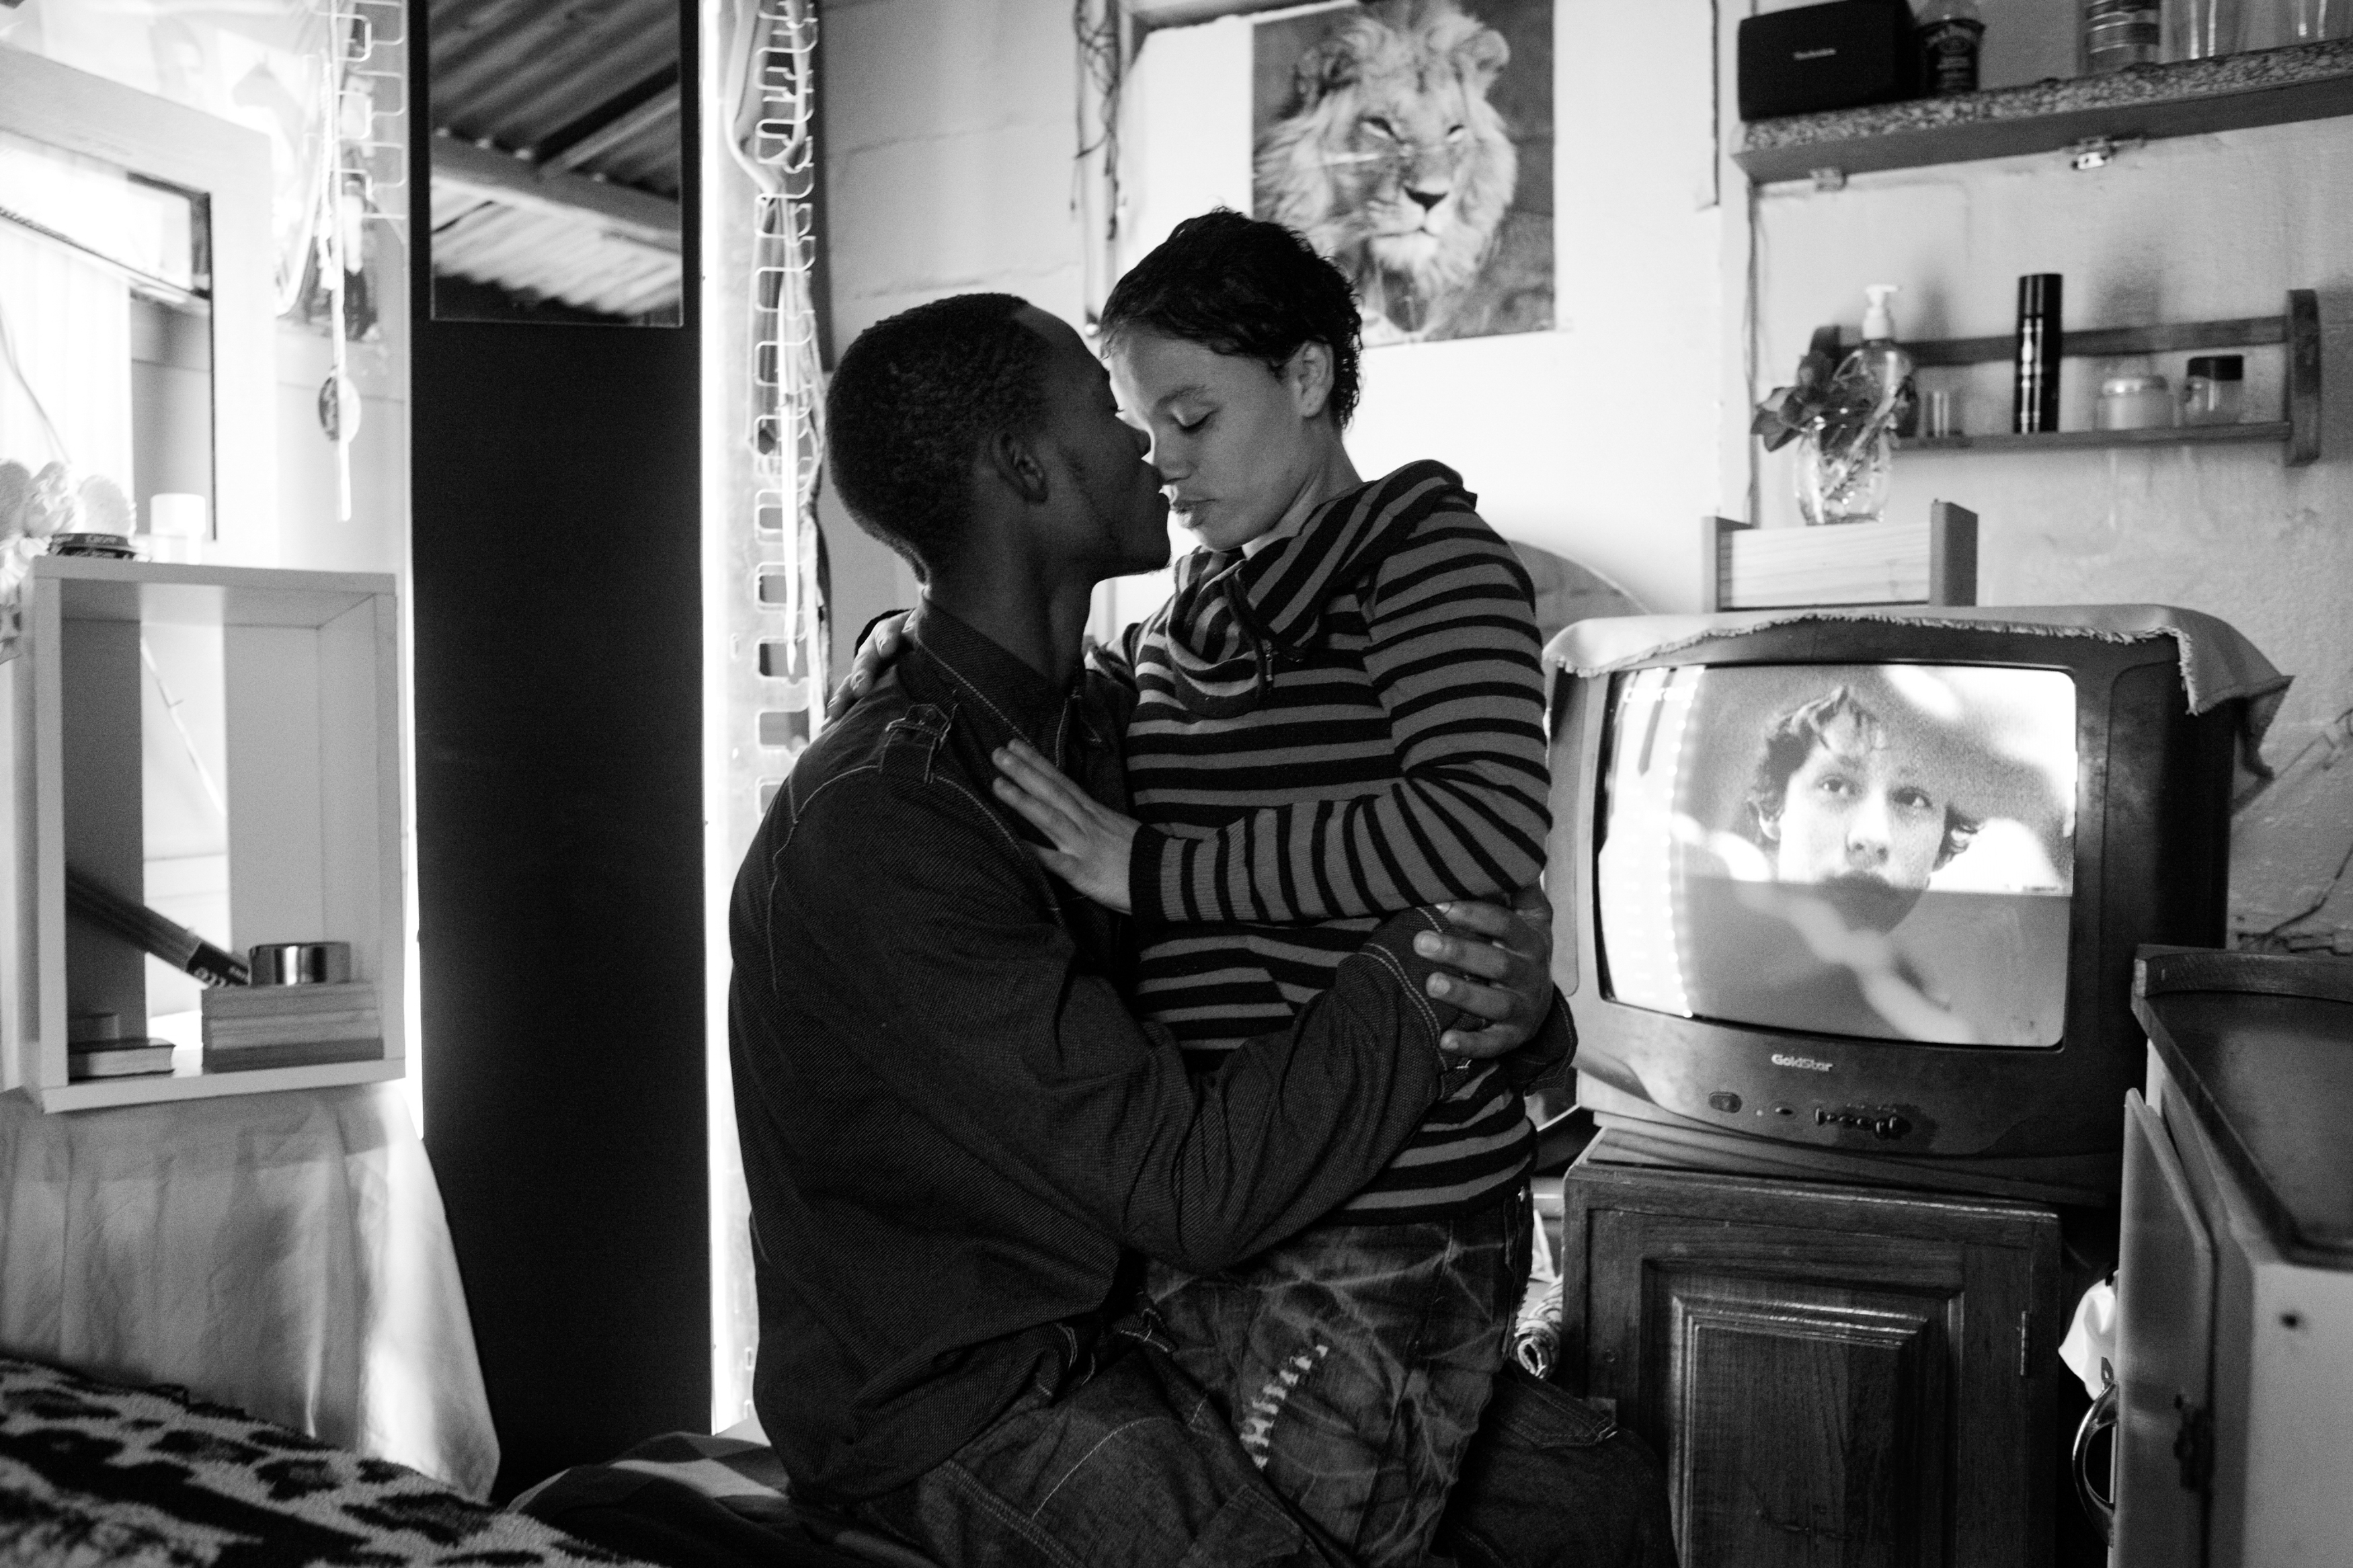 Edward Stuurman, 24, and BueAnne Douglas, 25, share a moment together in their corrugated iron room in Hooggenoeg, Grahamstown. Douglas is tested for HIV once every three months. “I don’t know why people are afraid to talk about HIV because you must talk about it,” she says. “That’s a thing you must talk about. HIV is what I am afraid of most. More than anything.” They have both struggled to find employment. Stuurman hoped to be a lawyer but couldn’t afford school past his matric. Douglas wanted to be a social worker. She briefly found temp work sorting fruit at a chain grocery store, but has been otherwise unemployed. “I don’t know what the country will be when Nelson Mandela passes away,” says Douglas. “I don’t know what the country could be without him.”